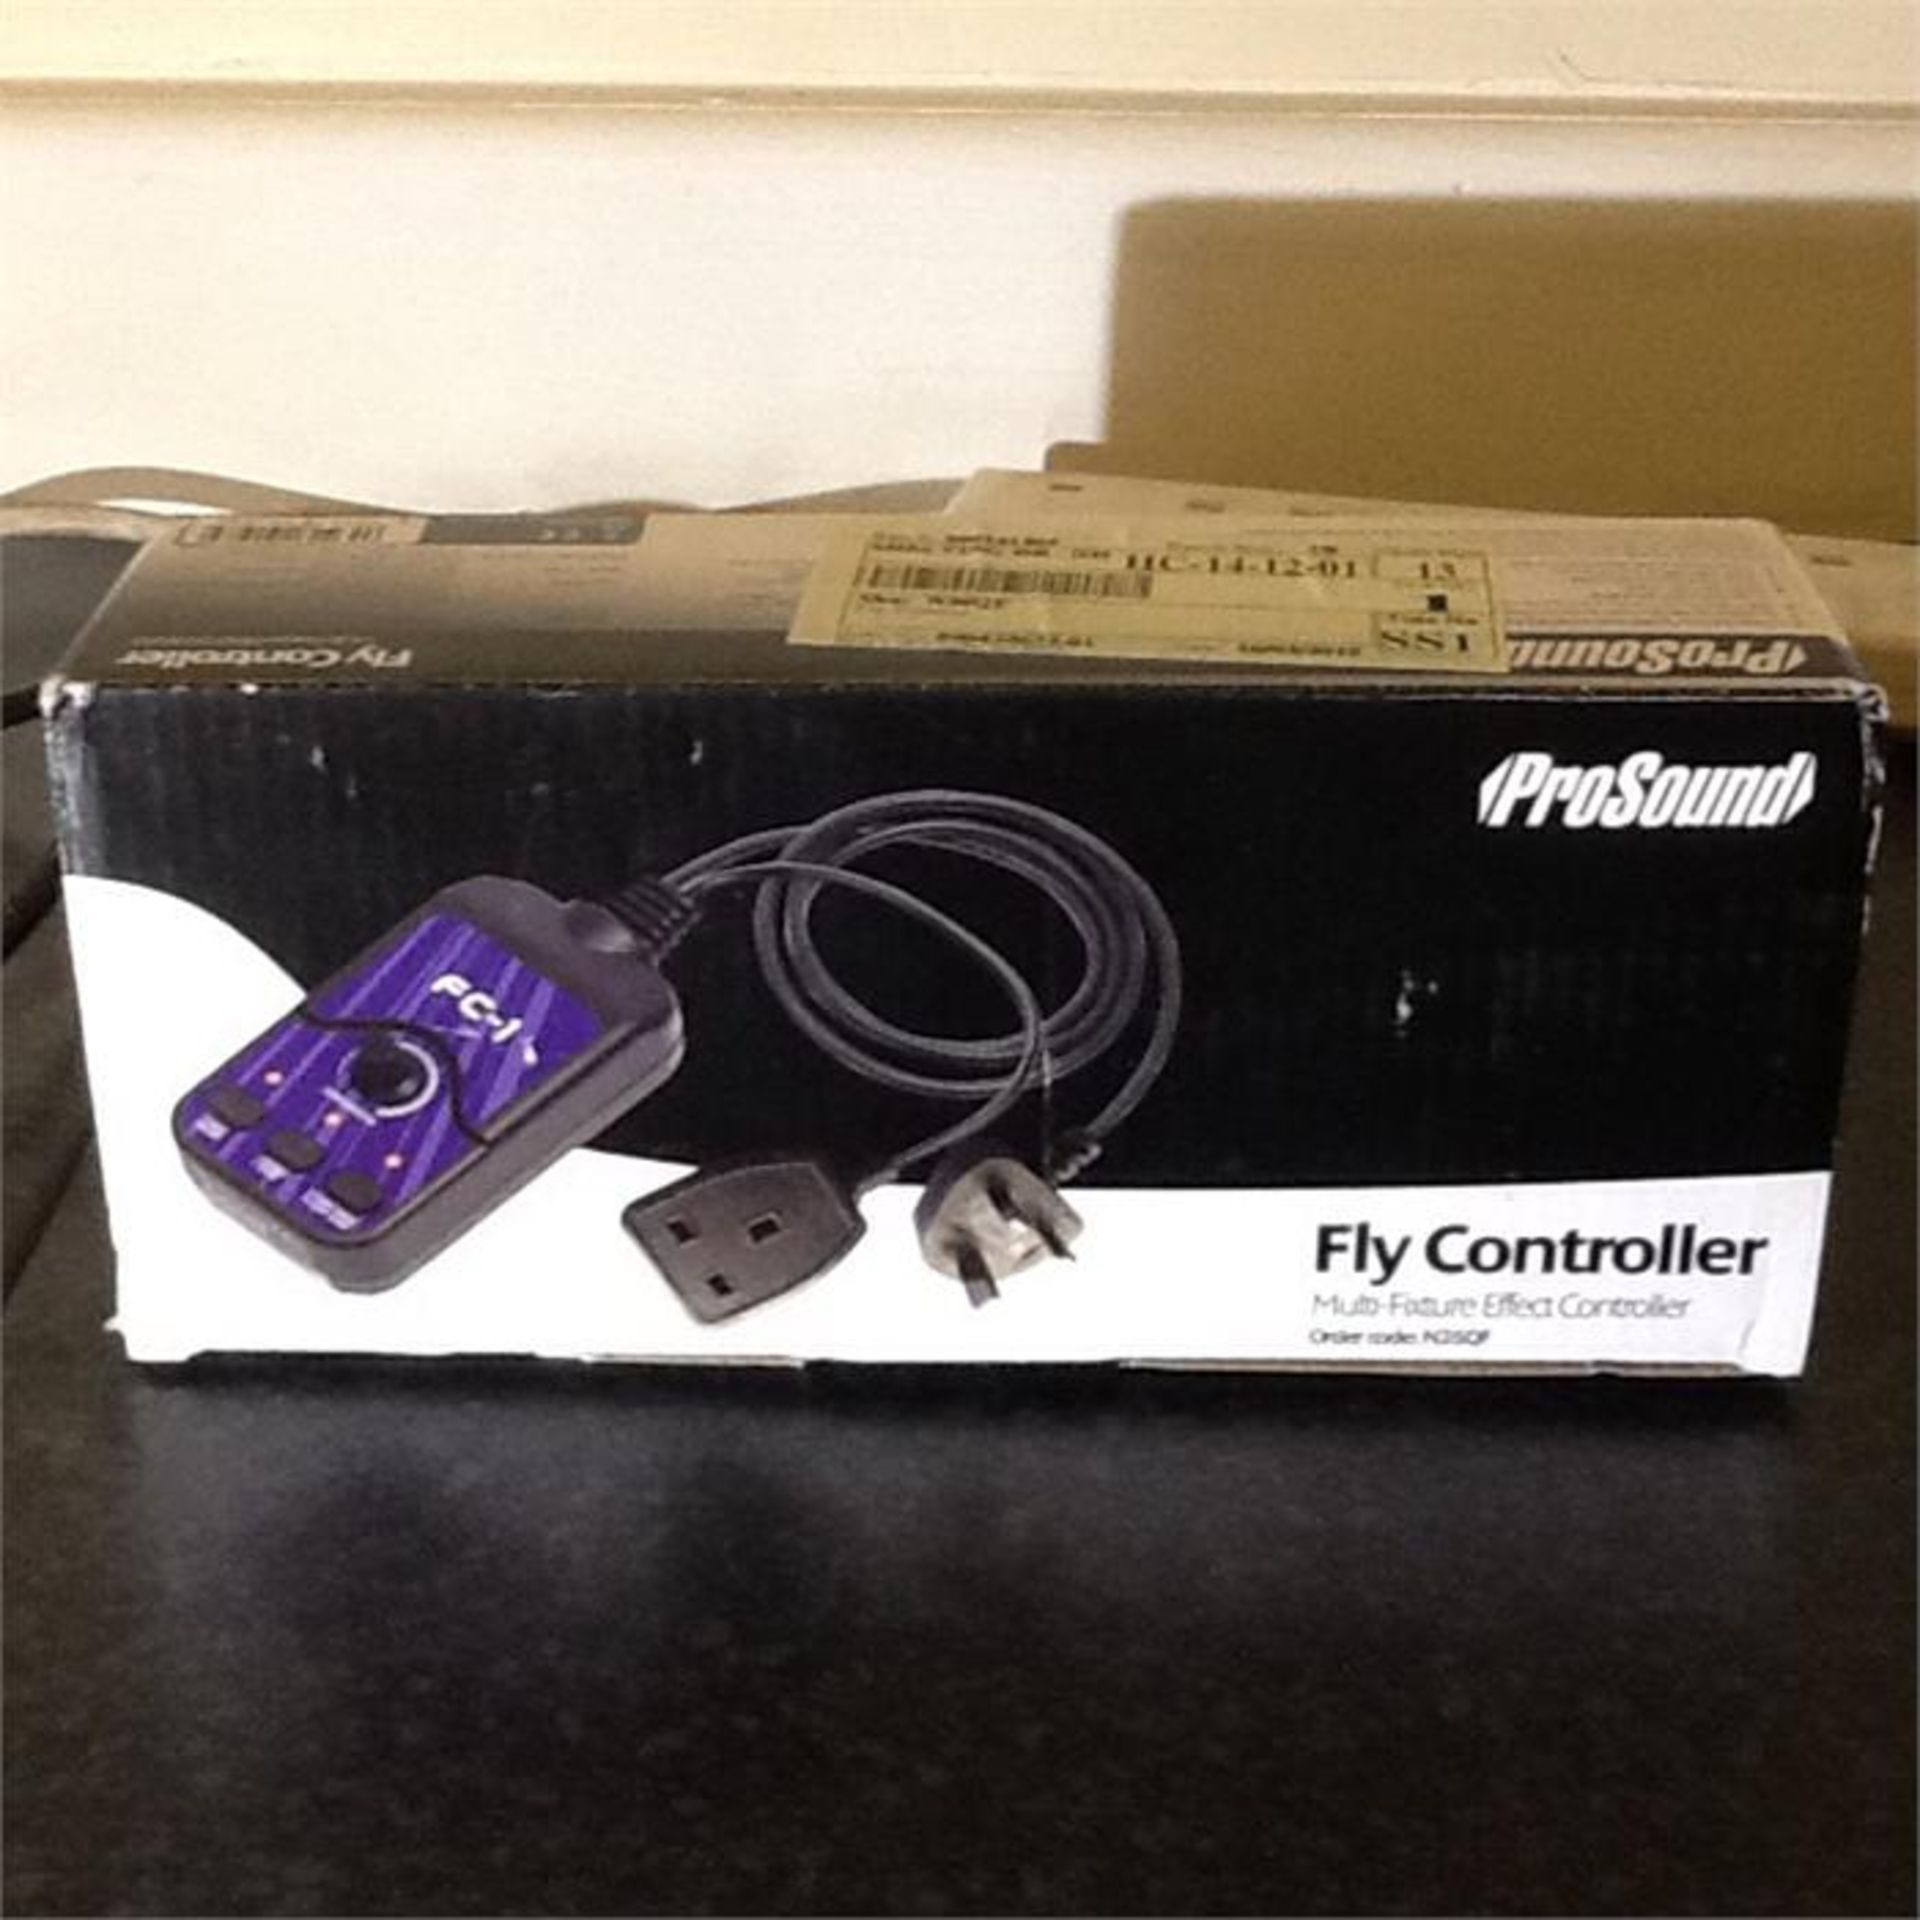 Prosound fly controller. Boxed - Image 2 of 5